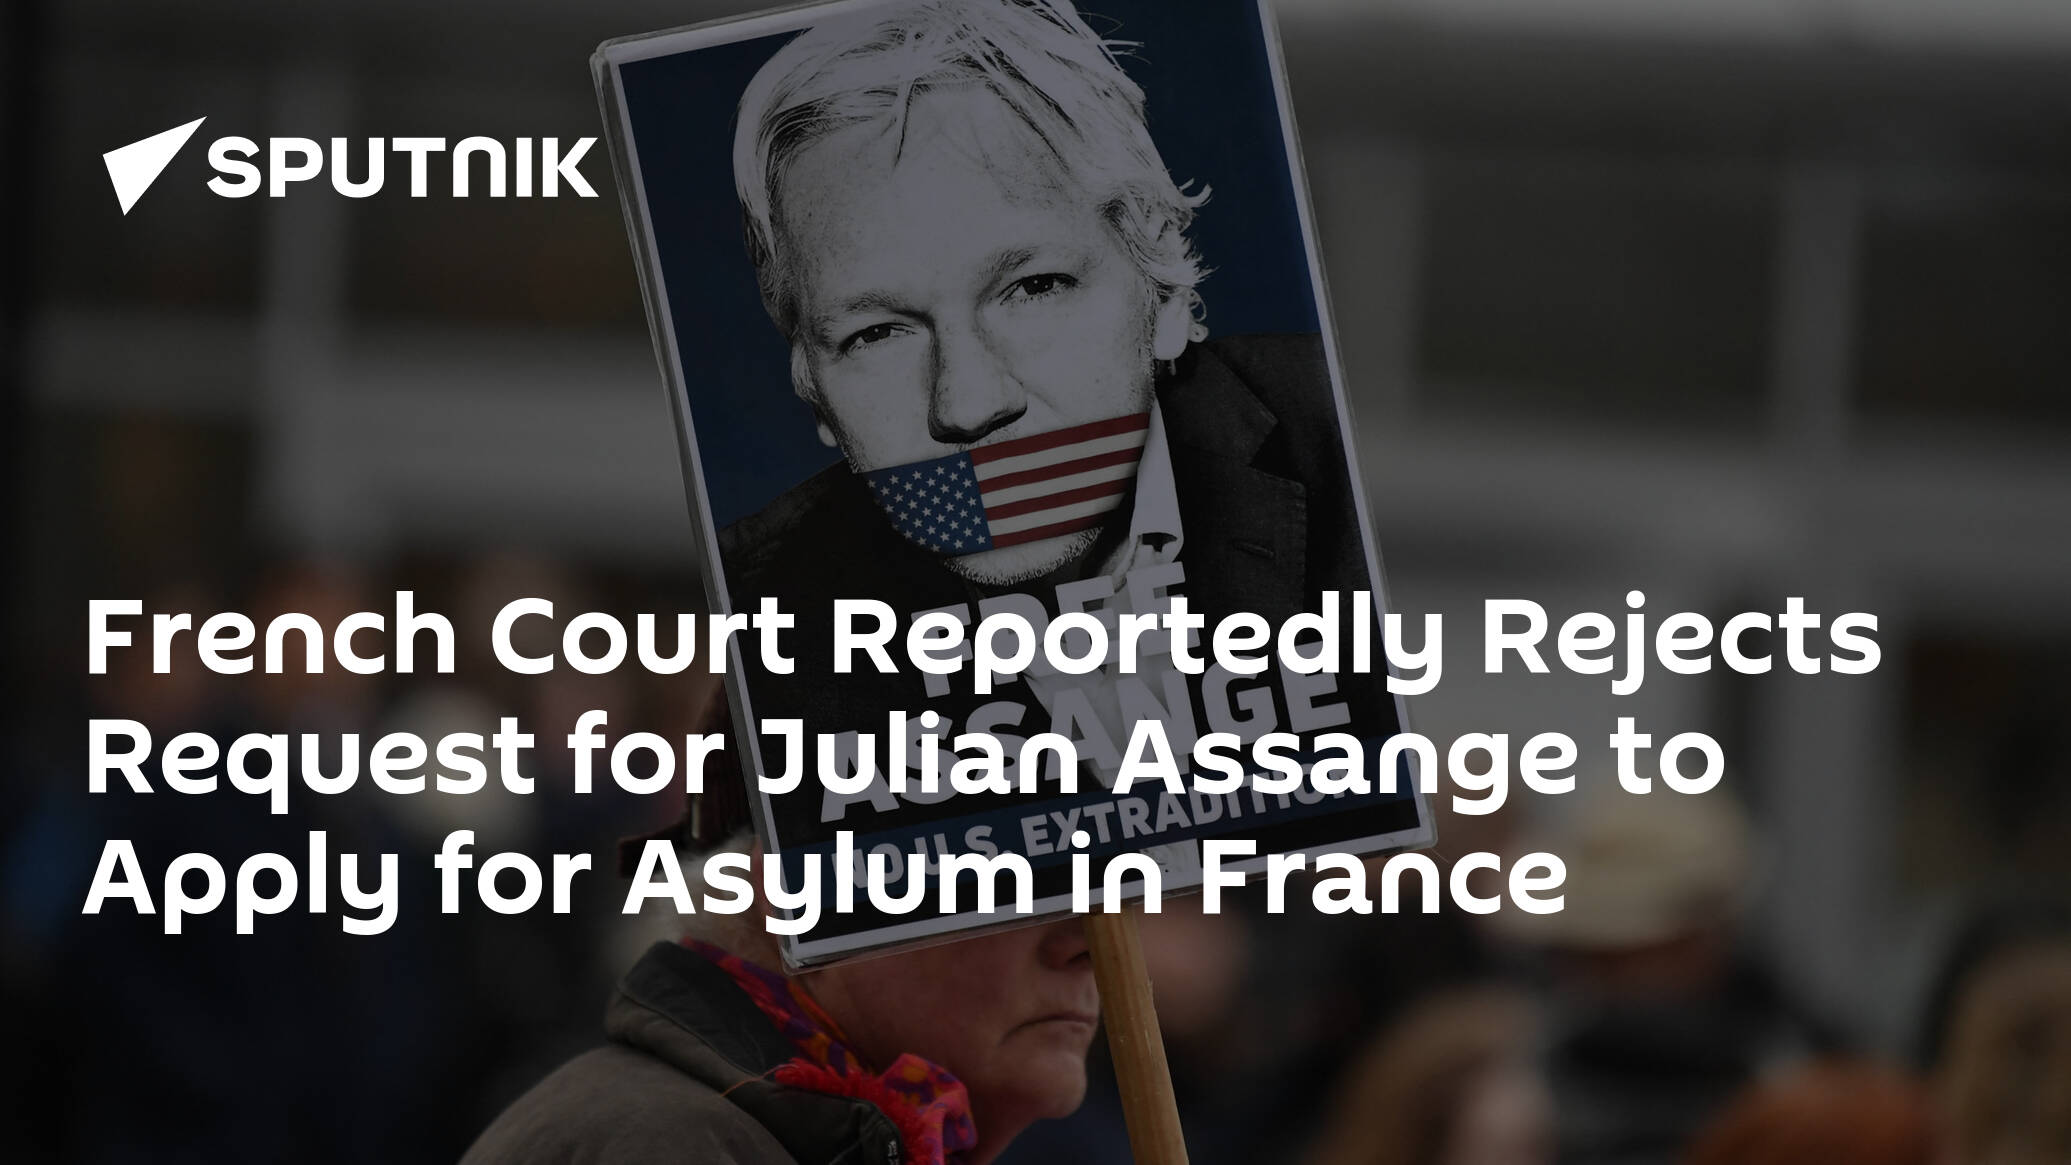 French Court Reportedly Rejects Request for Julian Assange to Apply for Asylum in France